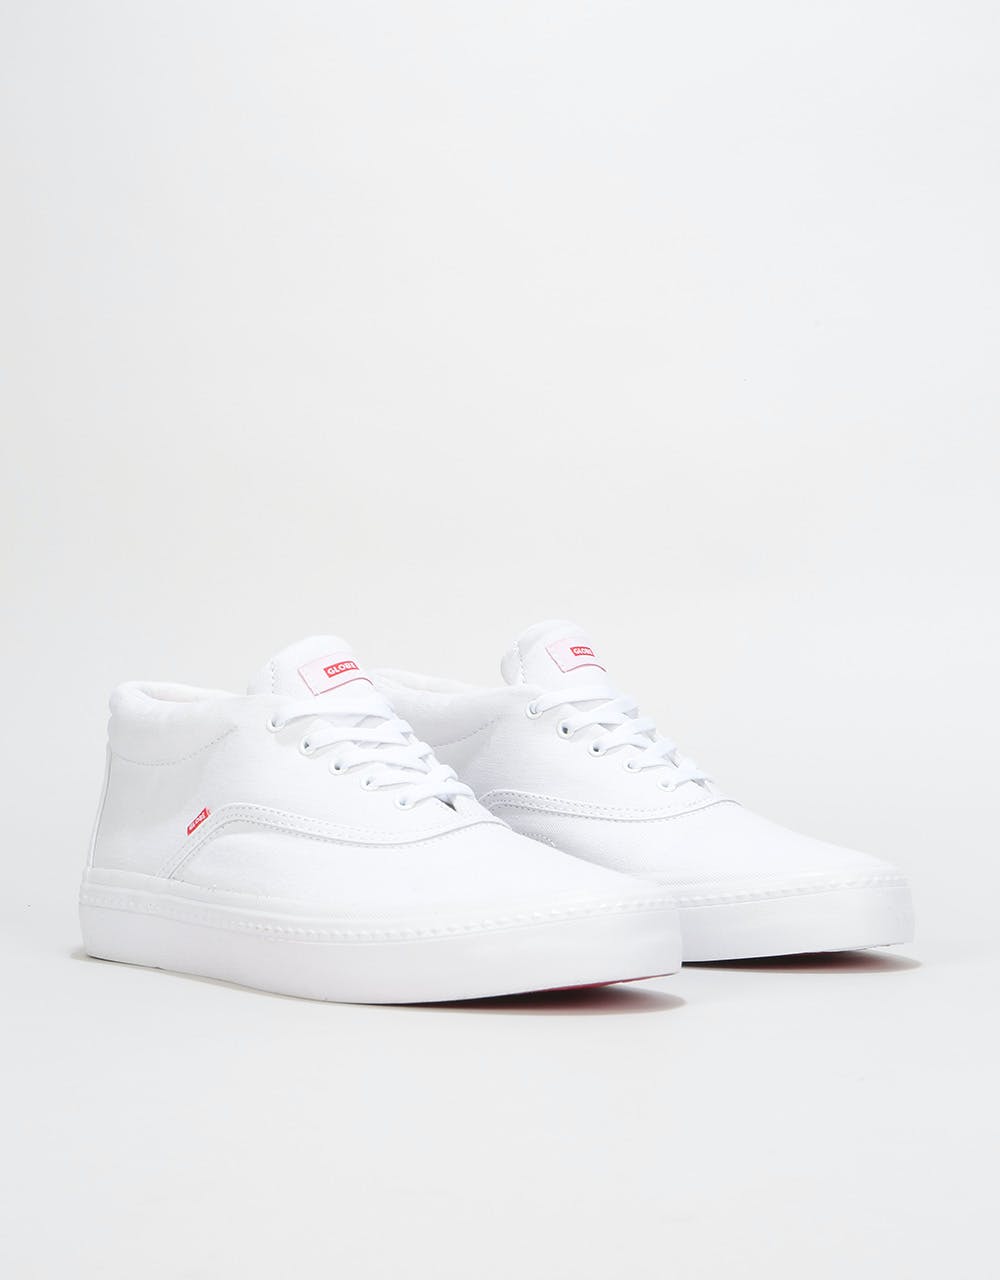 Globe Sprout Mid Skate Shoes - White/White